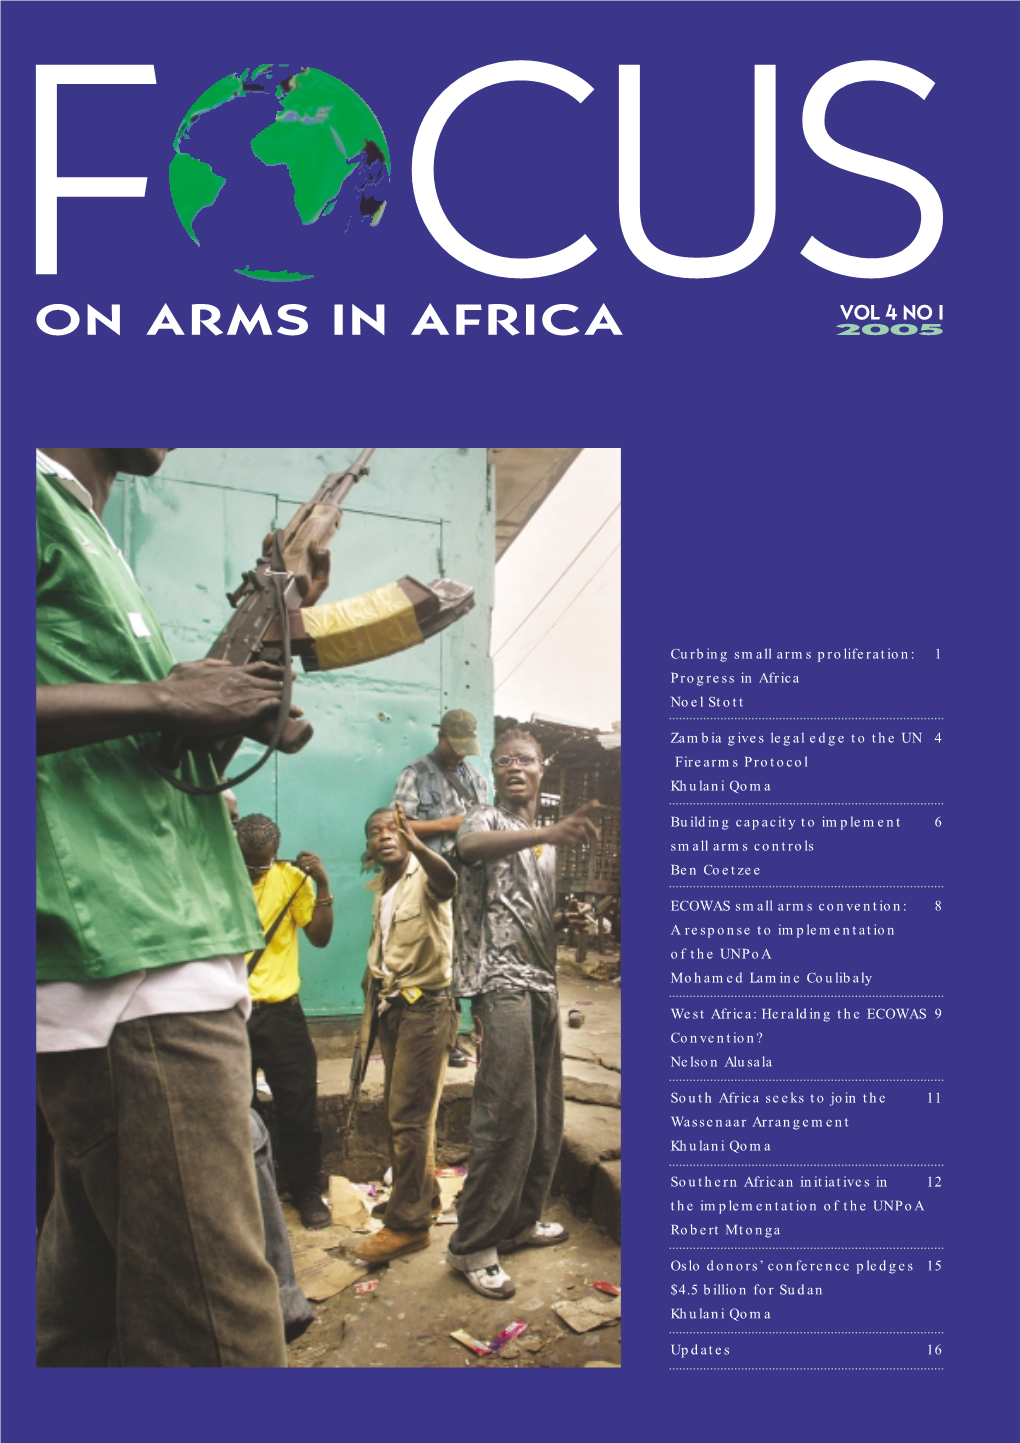 On Arms in Africa